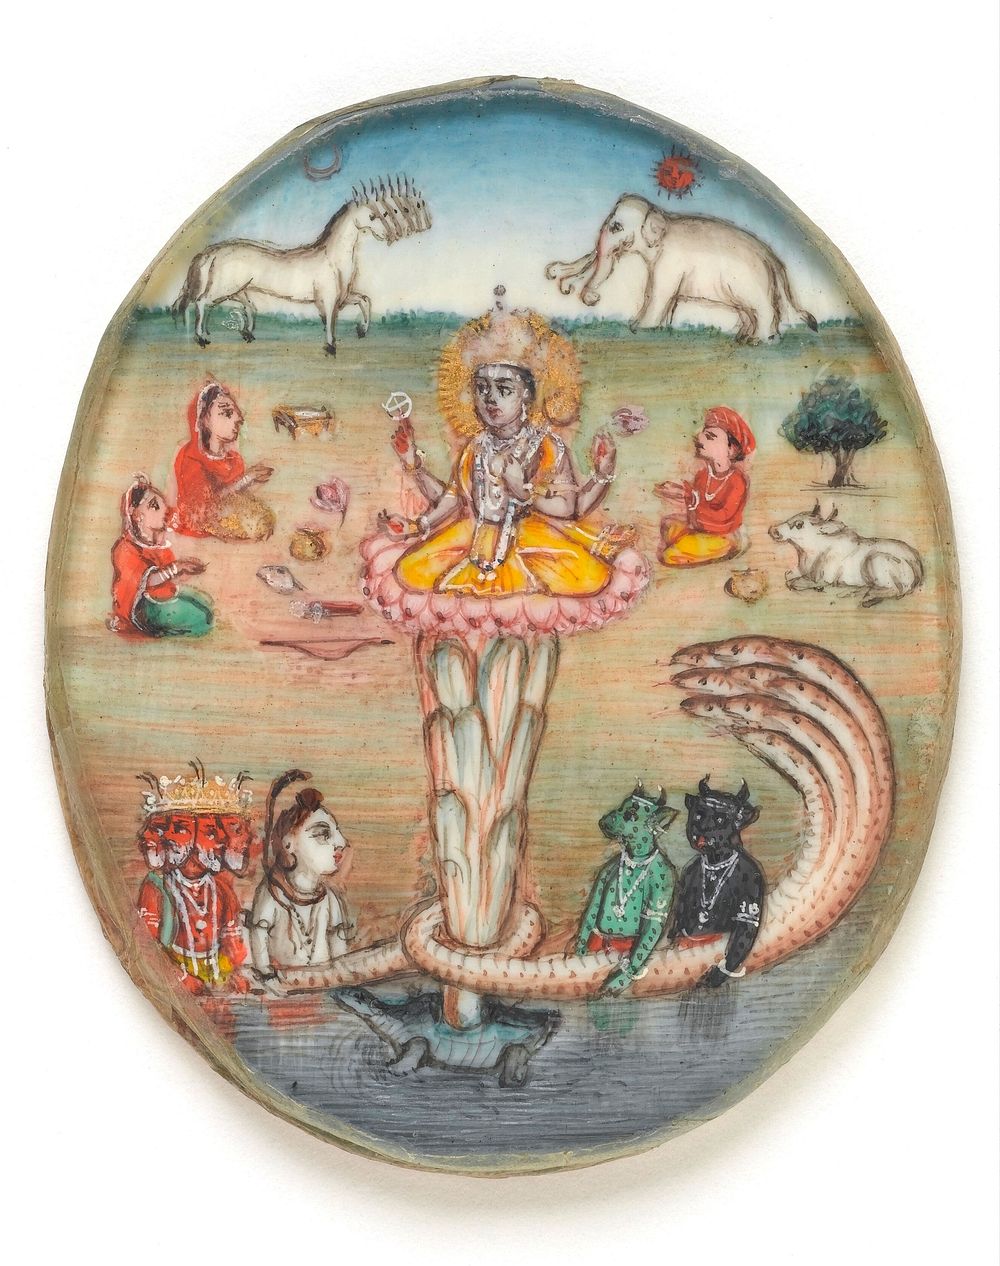 The churning of the ocean by gods and demons to retrieve the nectar of immortality; below, Lord Vishnu's avatar as Kurma…